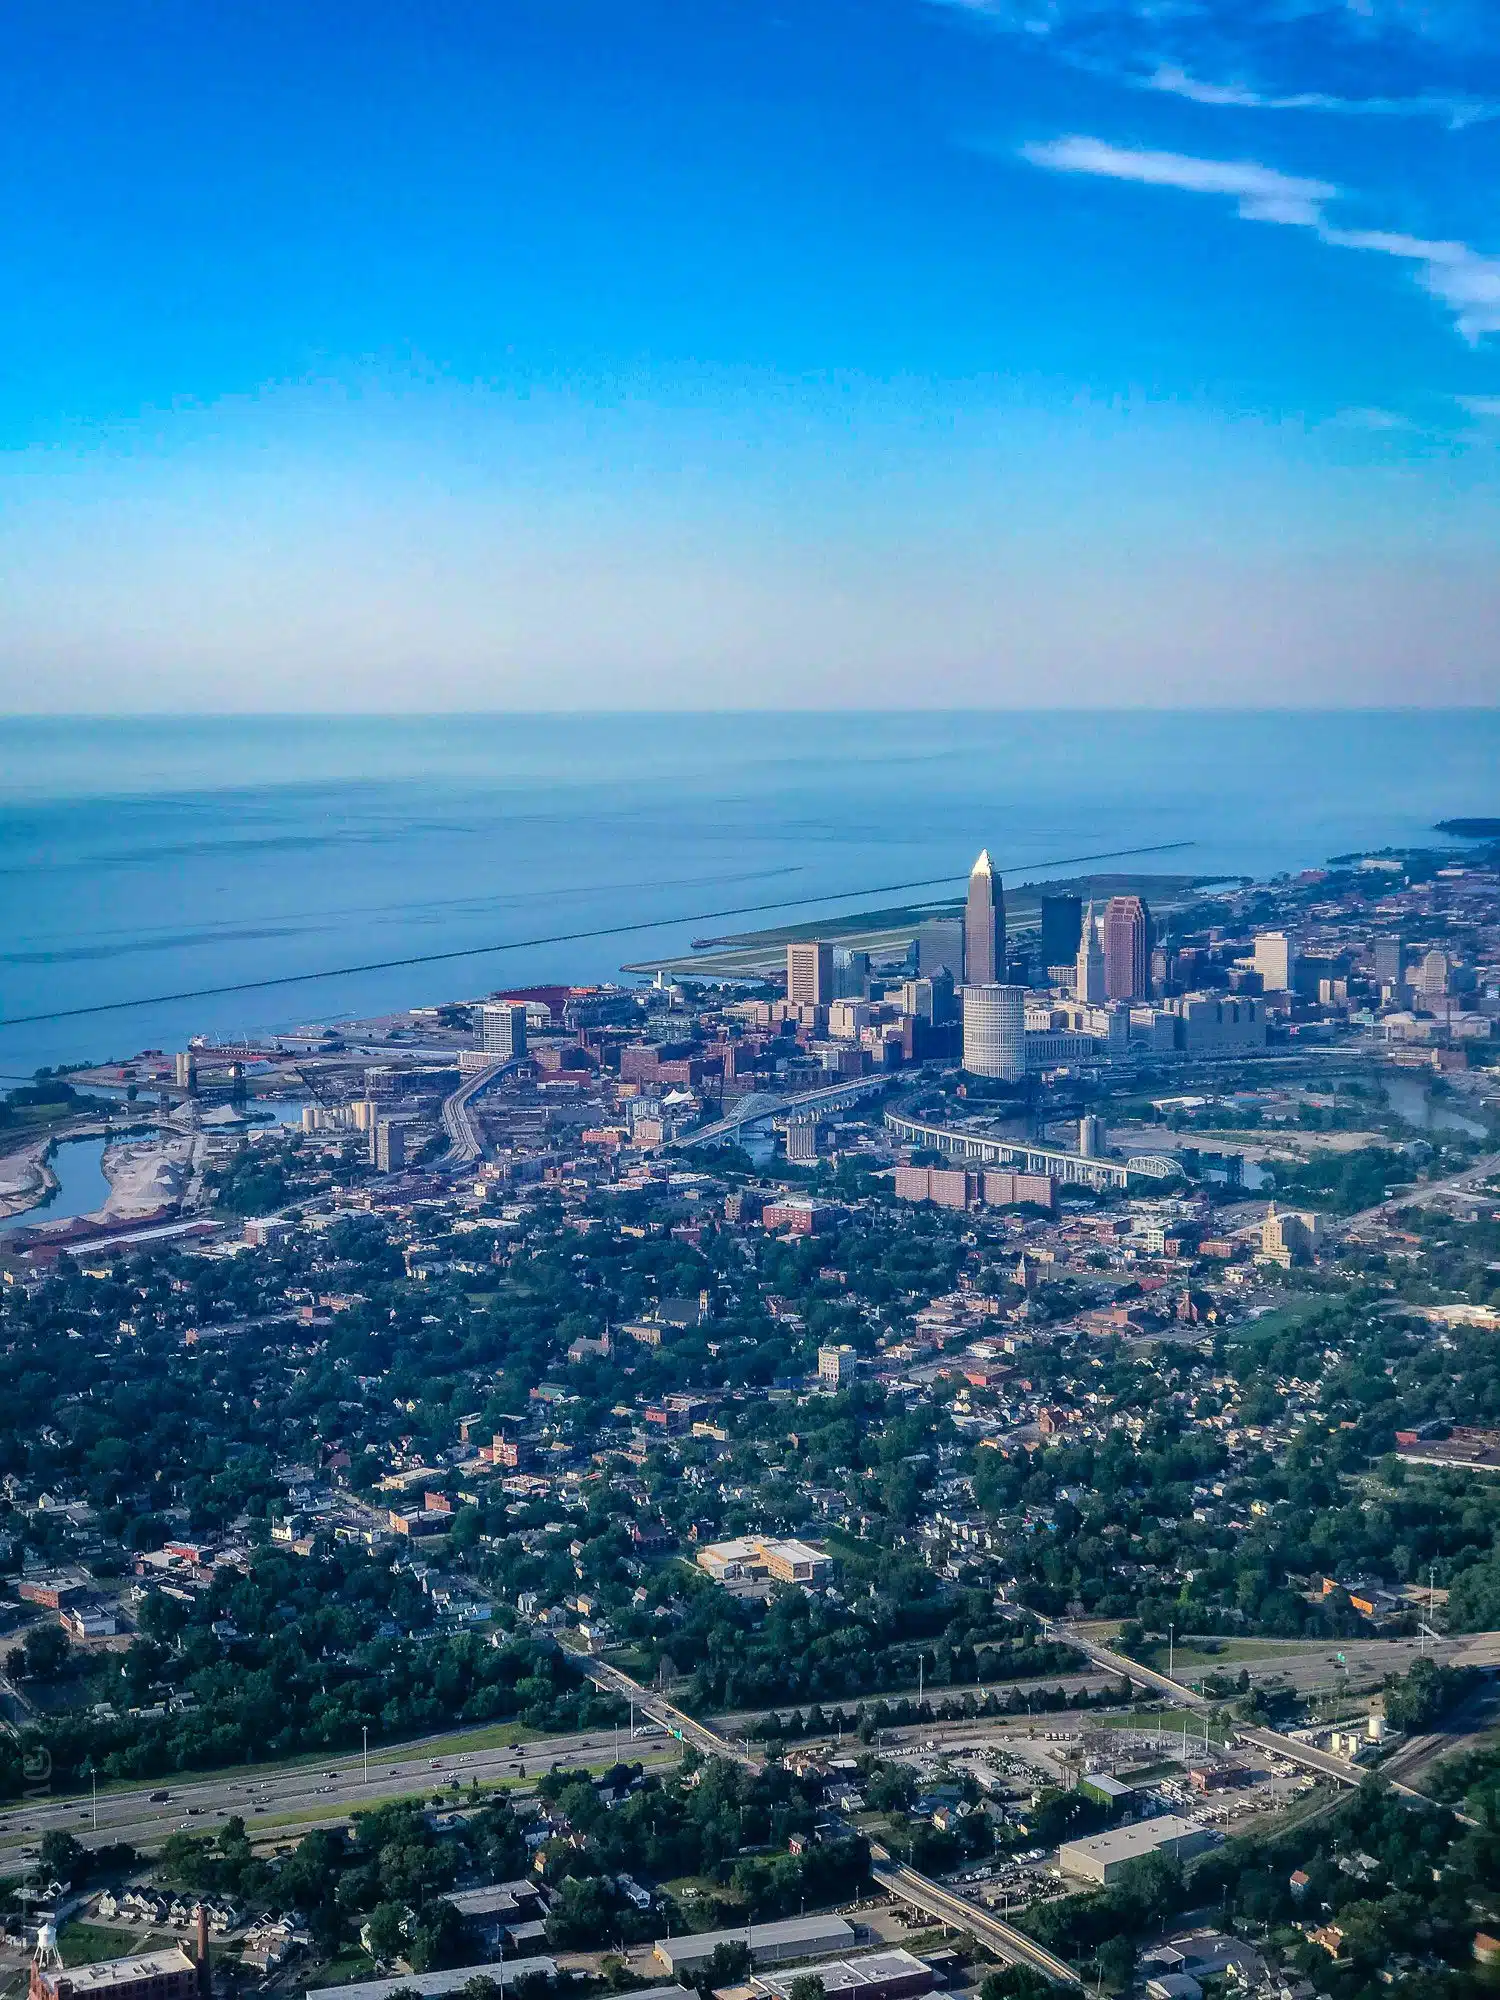 My plane coming into Cleveland, Ohio during a short trip.